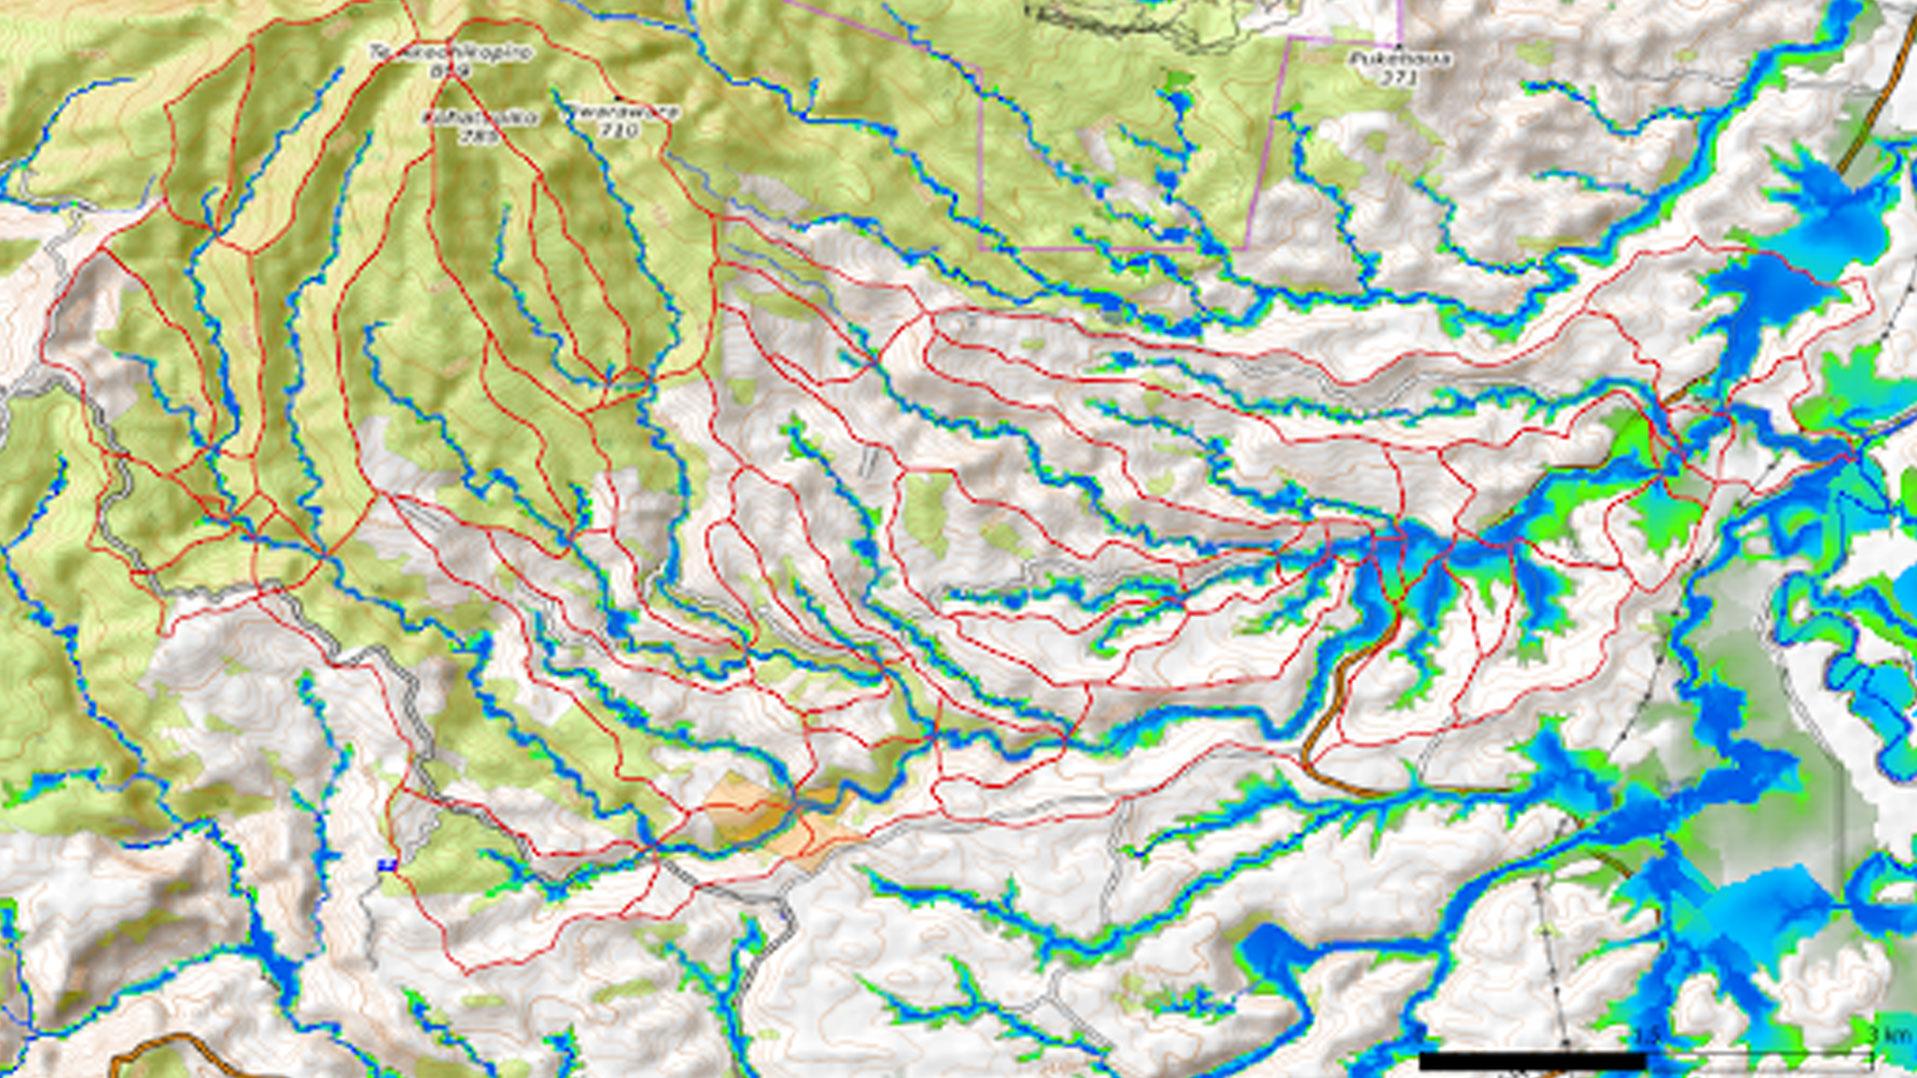 HAND of the investigated region showing flooded araeas and drainage lines